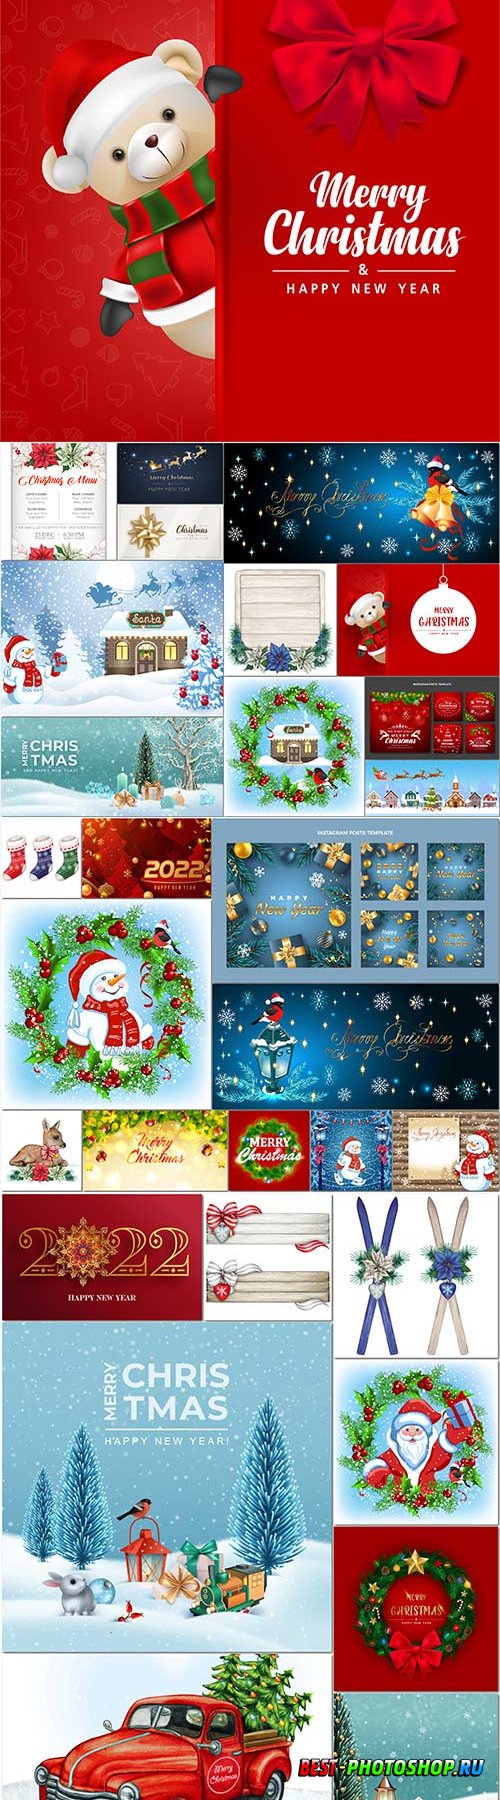 Merry christmas and happy new year vector poster